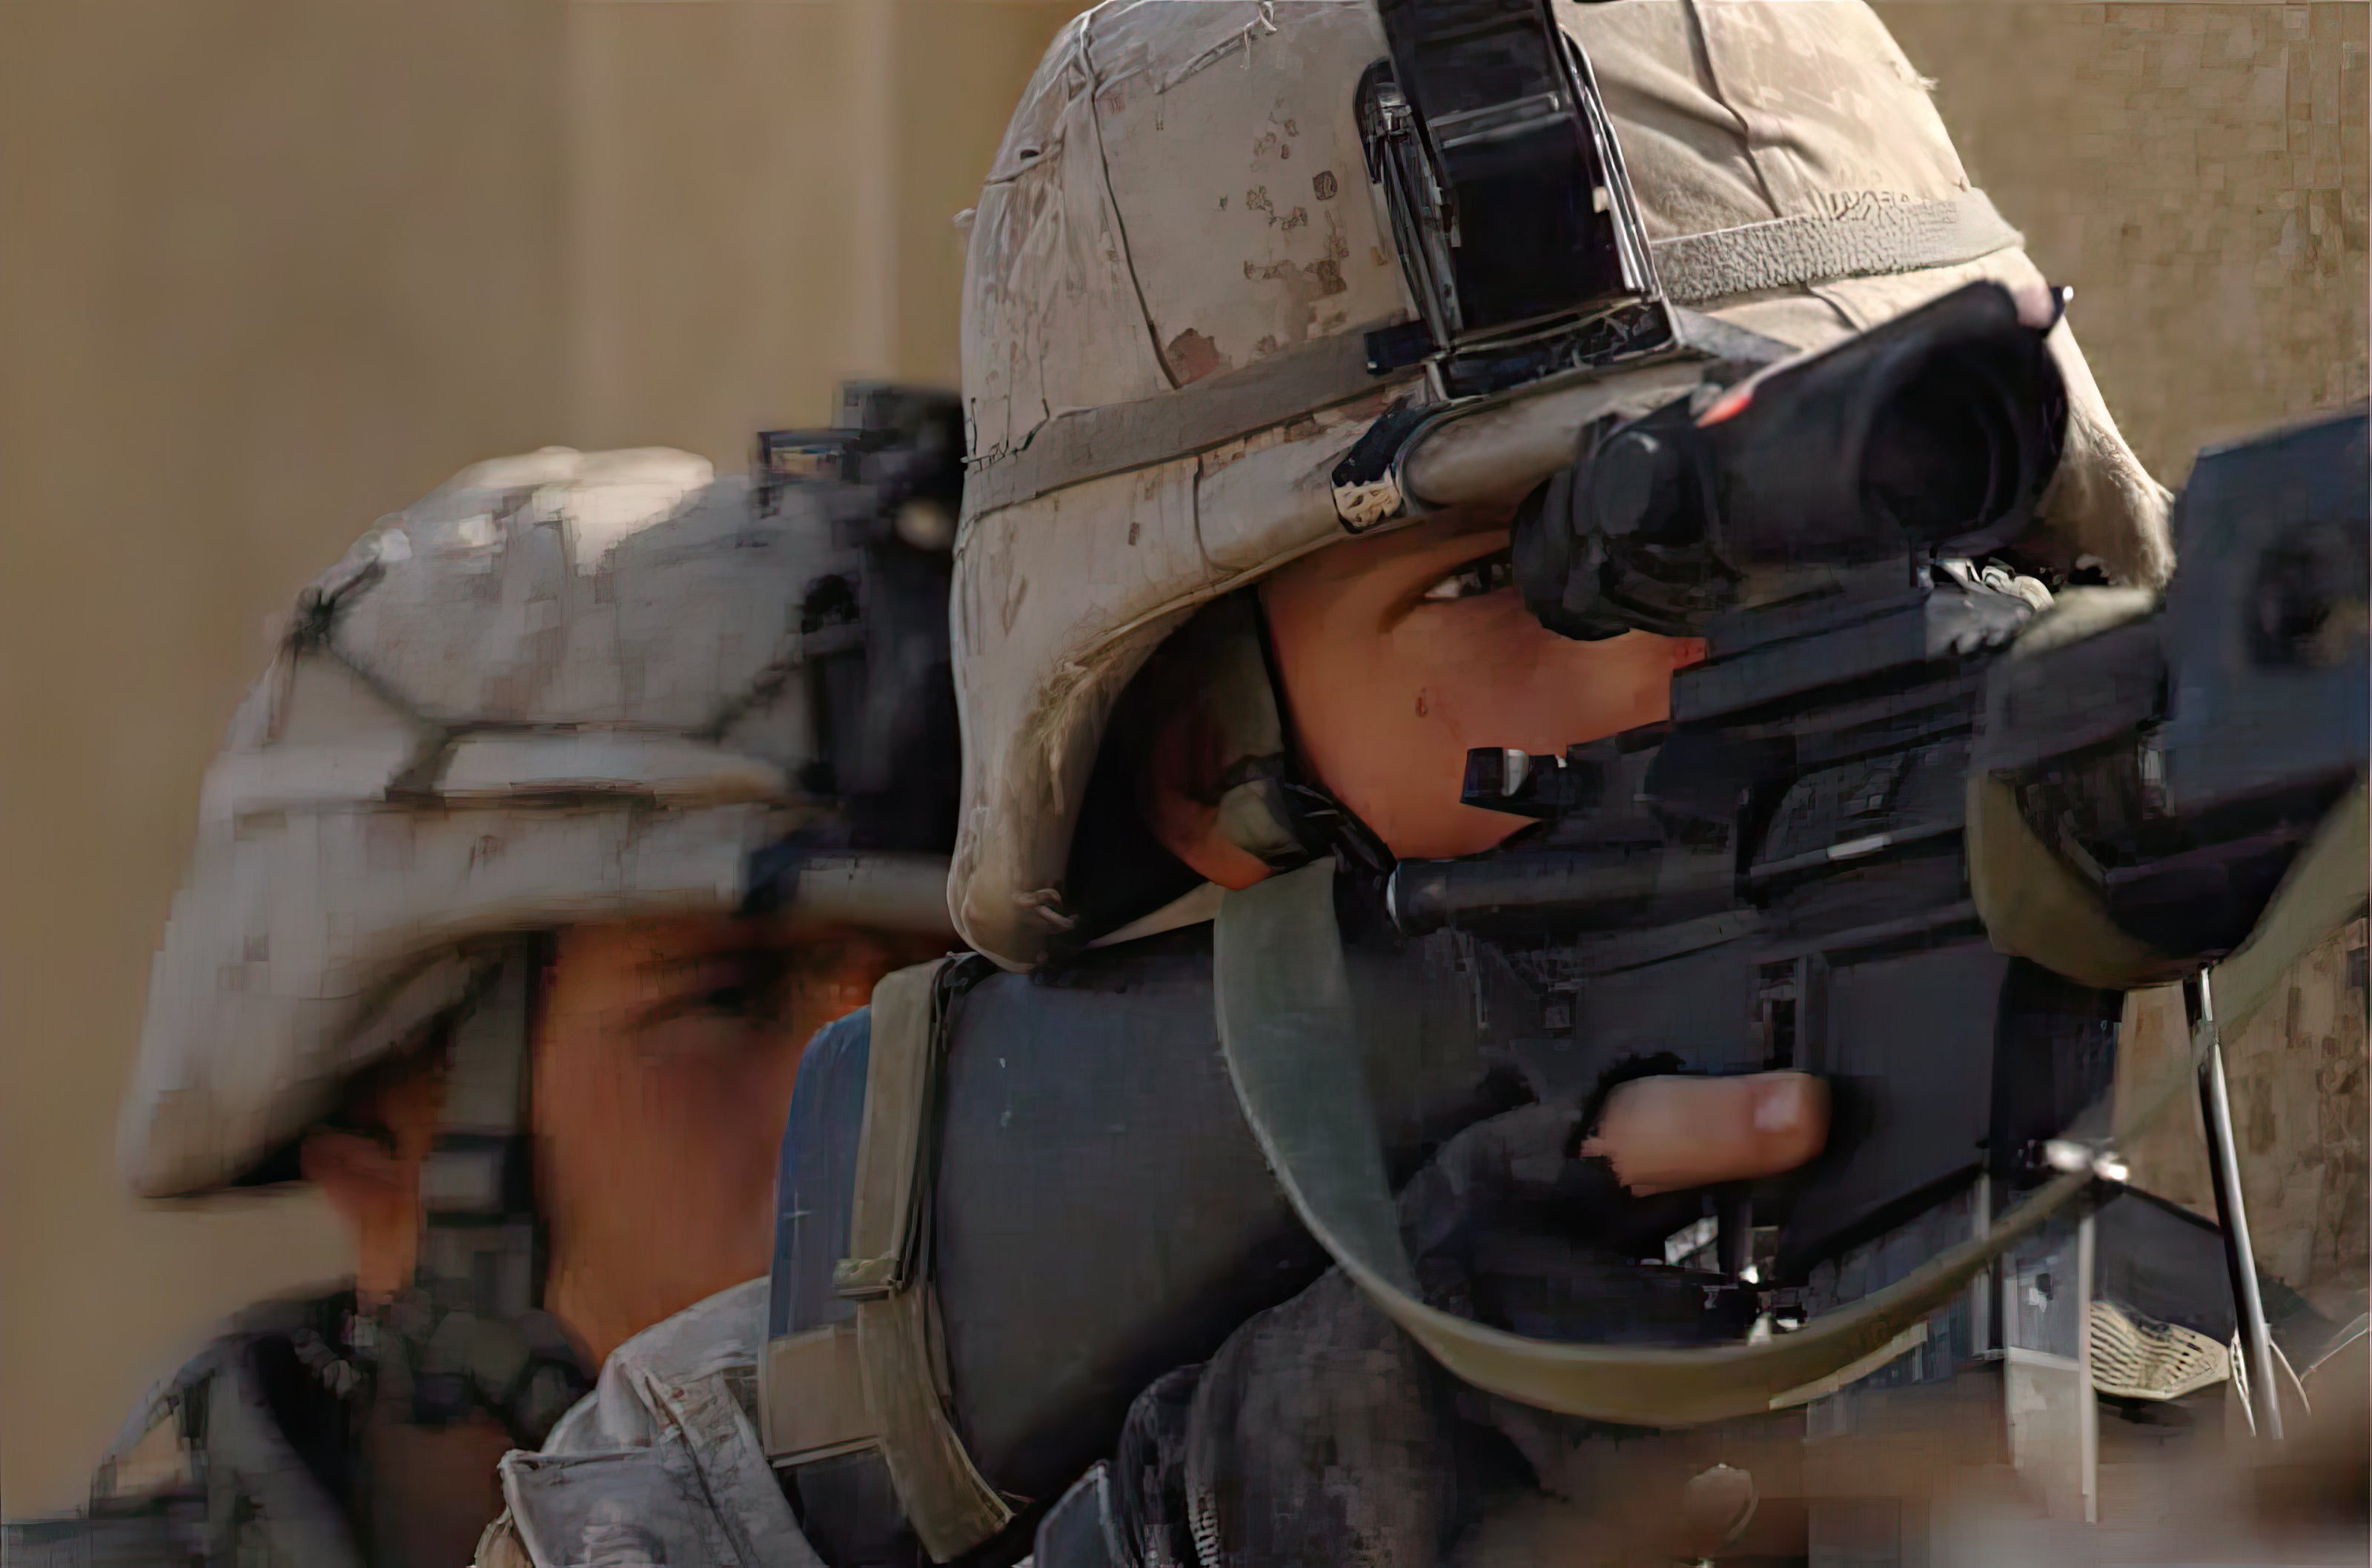 Battlefield Fallujah - Episode 10: Houses From Hell (November 13, 2004) - Image from battle